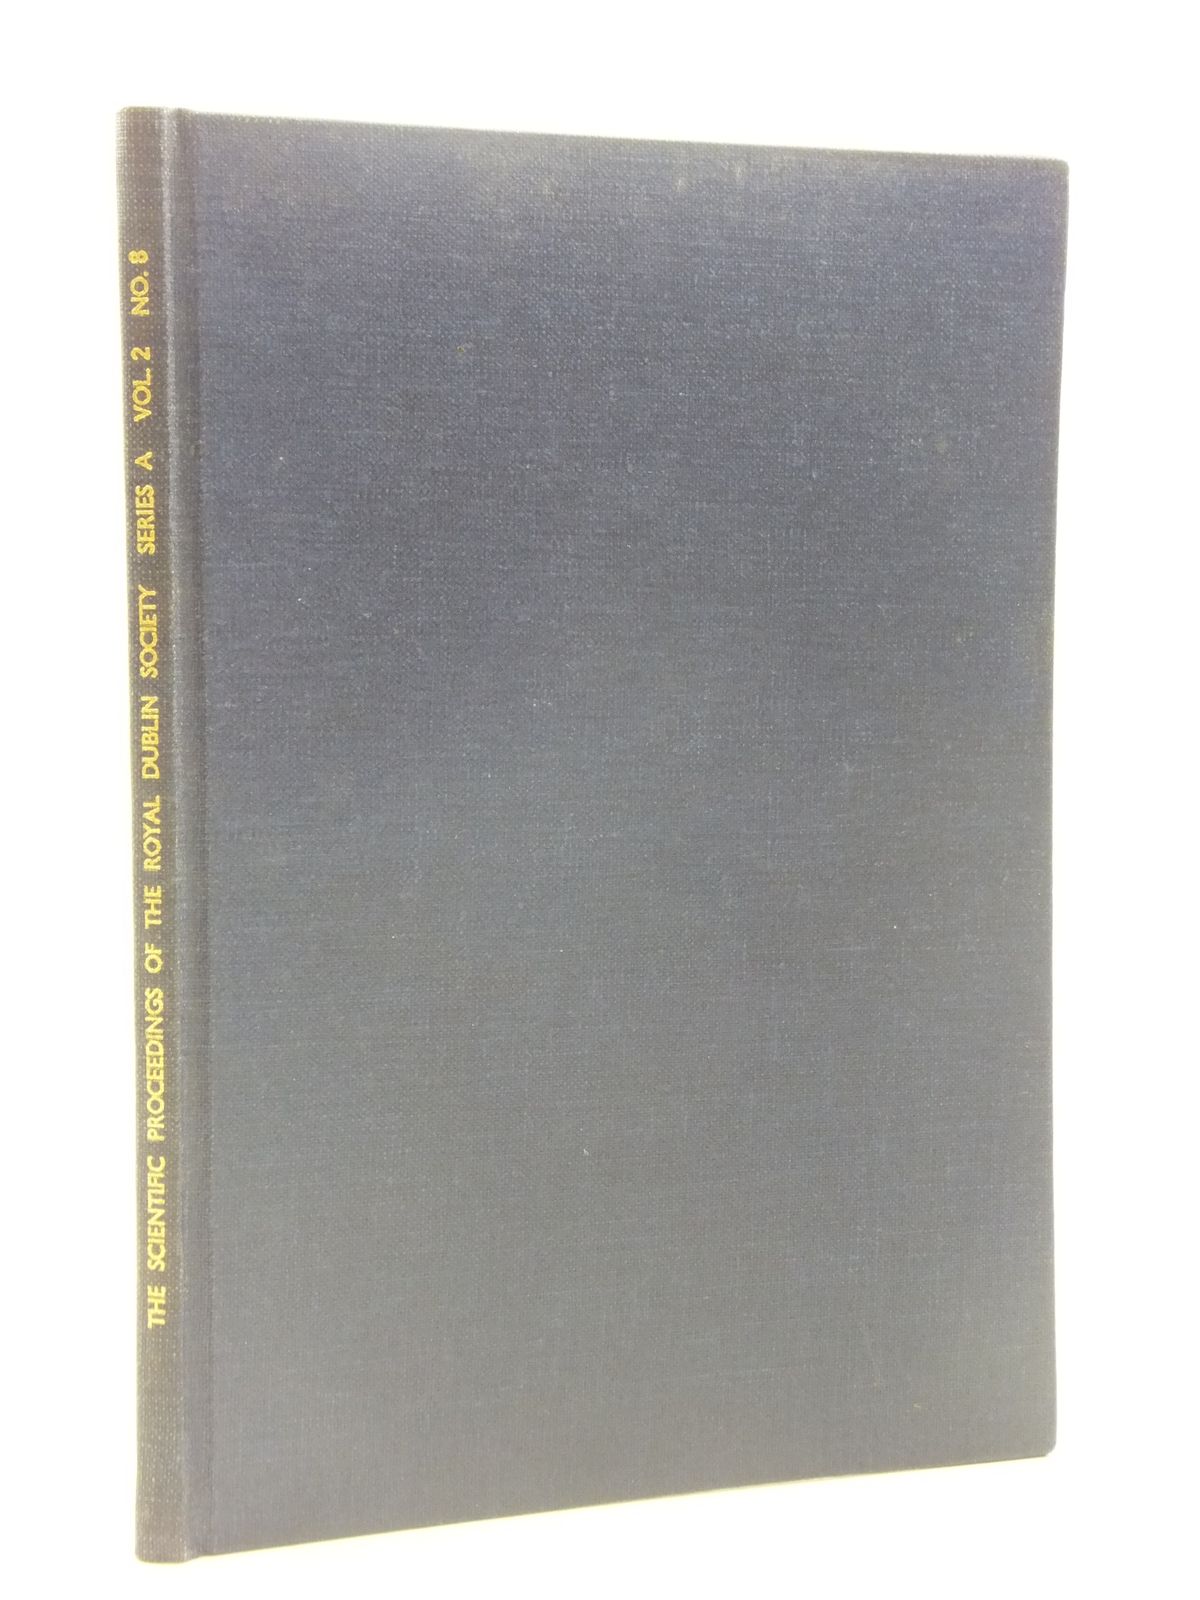 Photo of THE SCIENTIFIC PROCEEDINGS OF THE ROYAL DUBLIN SOCIETY SERIES A VOL. 2 No. 8 written by Jackson, John S. (STOCK CODE: 1605325)  for sale by Stella & Rose's Books